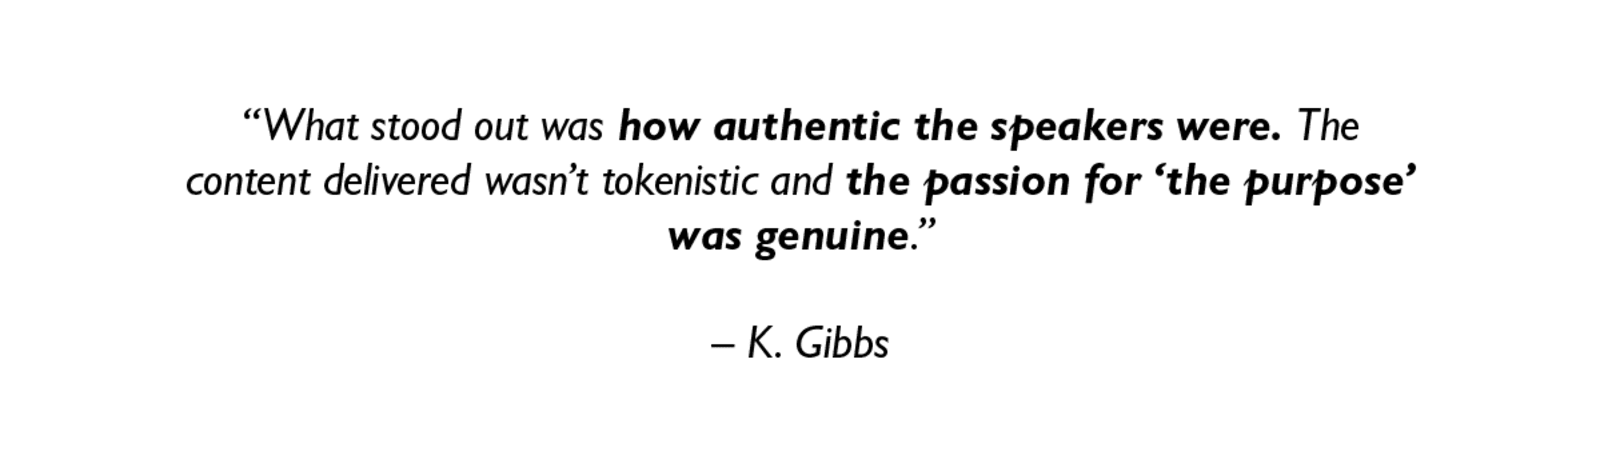 "What stood out was how authentic the speakers were. The content delivered wasn't tokenistic and the passion for the purpose was genuine." - K. Gibbs